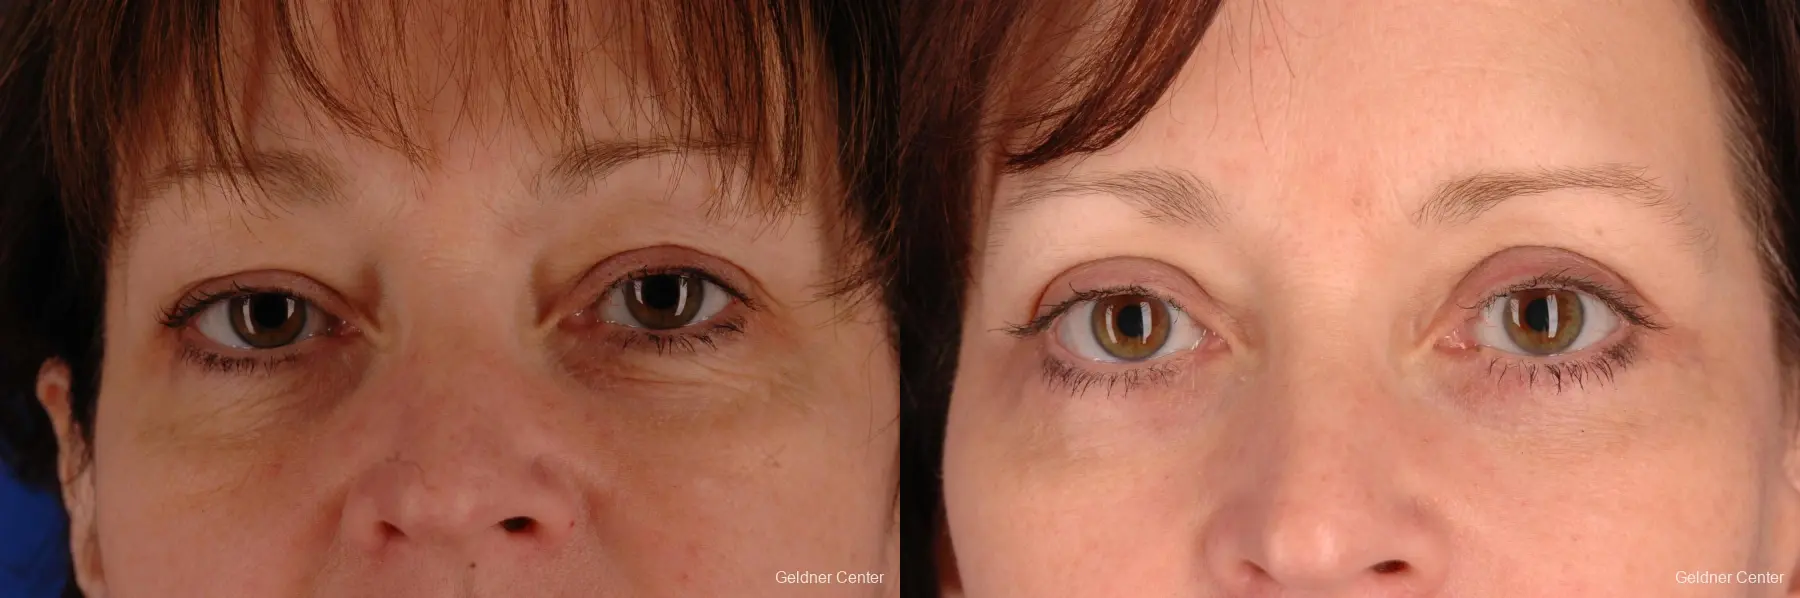 Chicago Eyelid Lift 2323 - Before and After